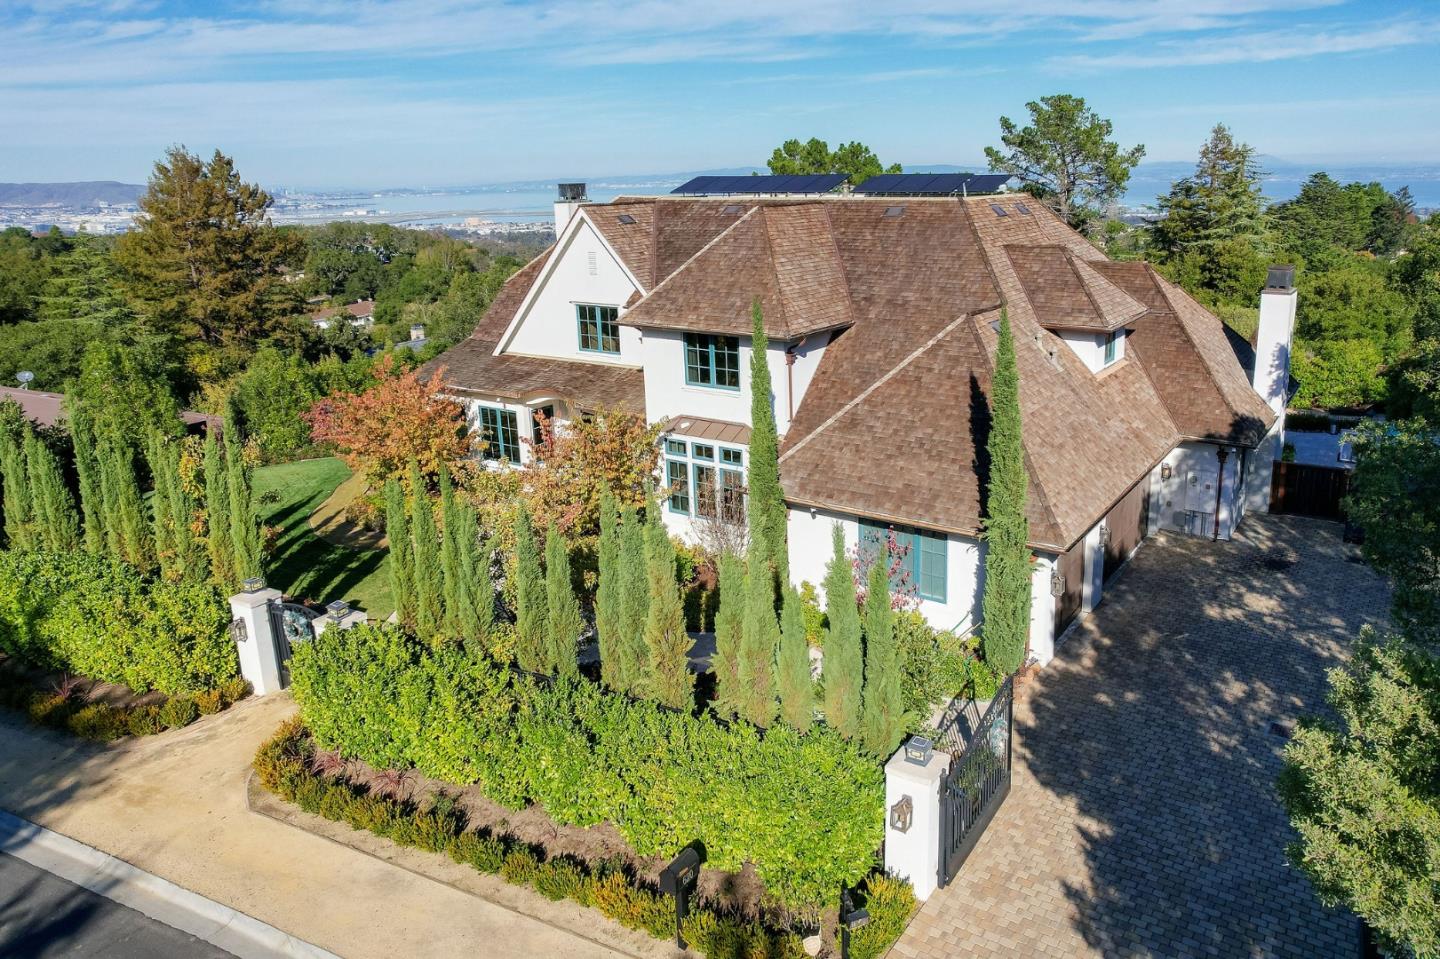 This gorgeous home is situated on a gated over half-acre lot with breathtaking bay views. Built-in 2015 using the finest materials and with great attention to detail, this home has all the modern amenities you desire. Amenities include an office/den, formal living room with fireplace, formal dining room, butler's pantry, a great room comprised of the chef's kitchen, breakfast area, and family room, a mudroom, a powder room, a laundry room, and 5 en-suite bedrooms with tray ceilings. Among the kitchen appliances are a full-sized Sub-ZeroÂ® wine refrigerator,  a WolfÂ® 6-burner range with matching exhaust hood, WolfÂ® built-in convection oven and built-in microwave, Sub-ZeroÂ® refrigerator and freezer, and two dishwashers. The family has a high coved ceiling and a fireplace. Throughout the home, you will find recessed lighting, striking light fixtures, crown molding, and hardwood, marble, and travertine flooring. Outside, you will find sprawling lawns, a large patio, and a heated pool.